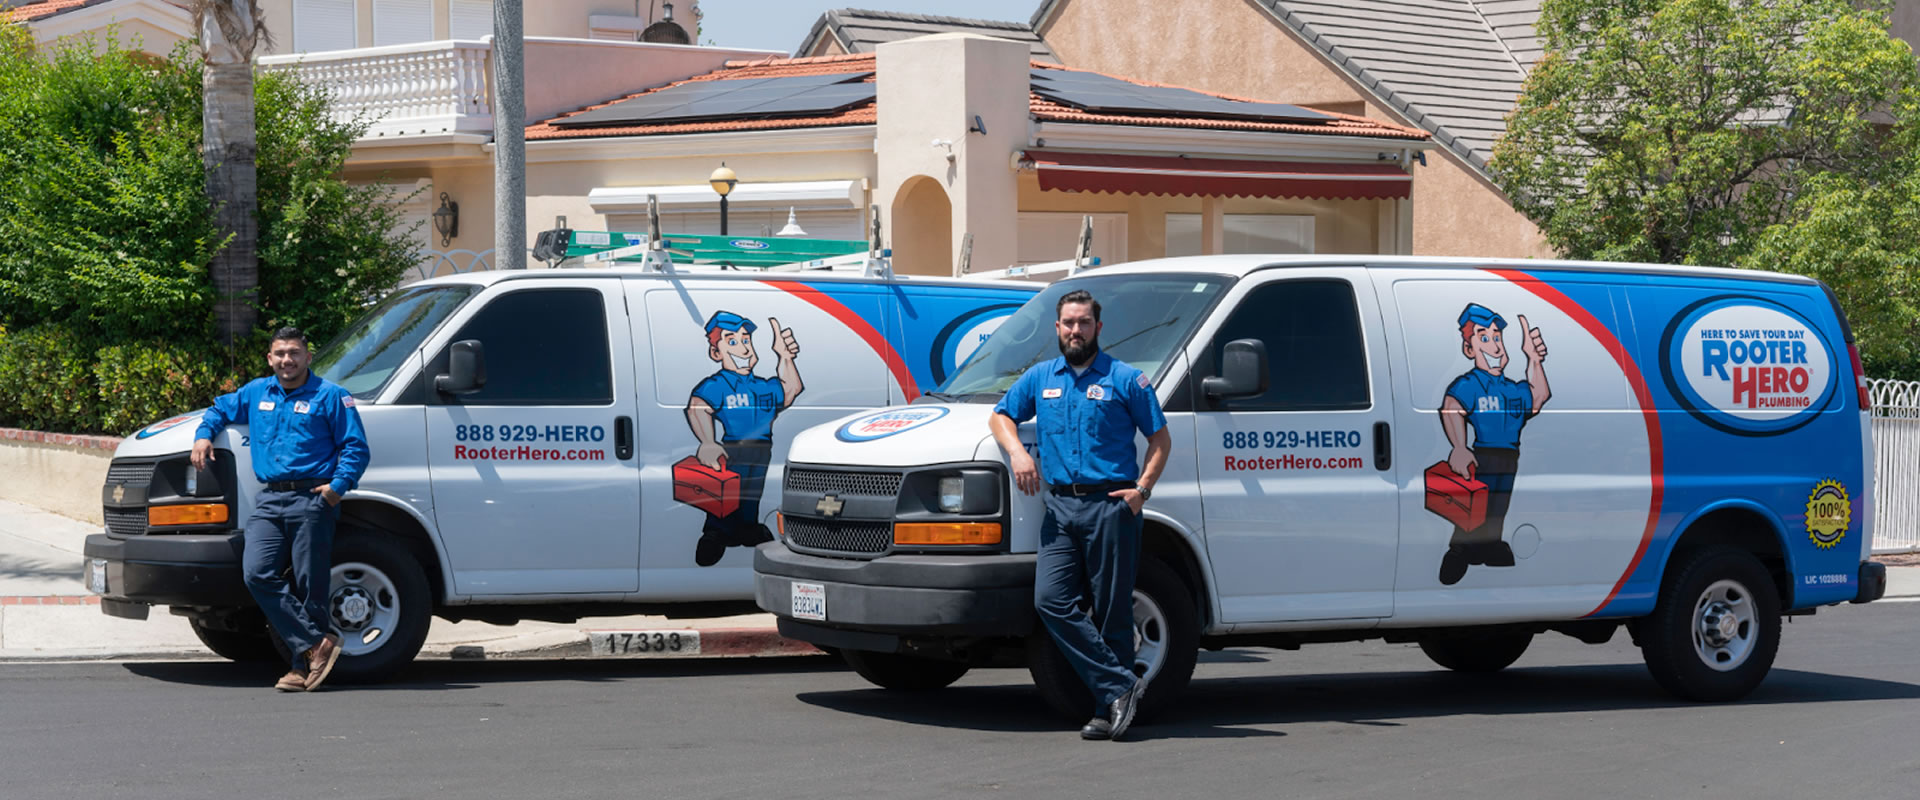 Plumbing & Drain Cleaning Services, Top Tier